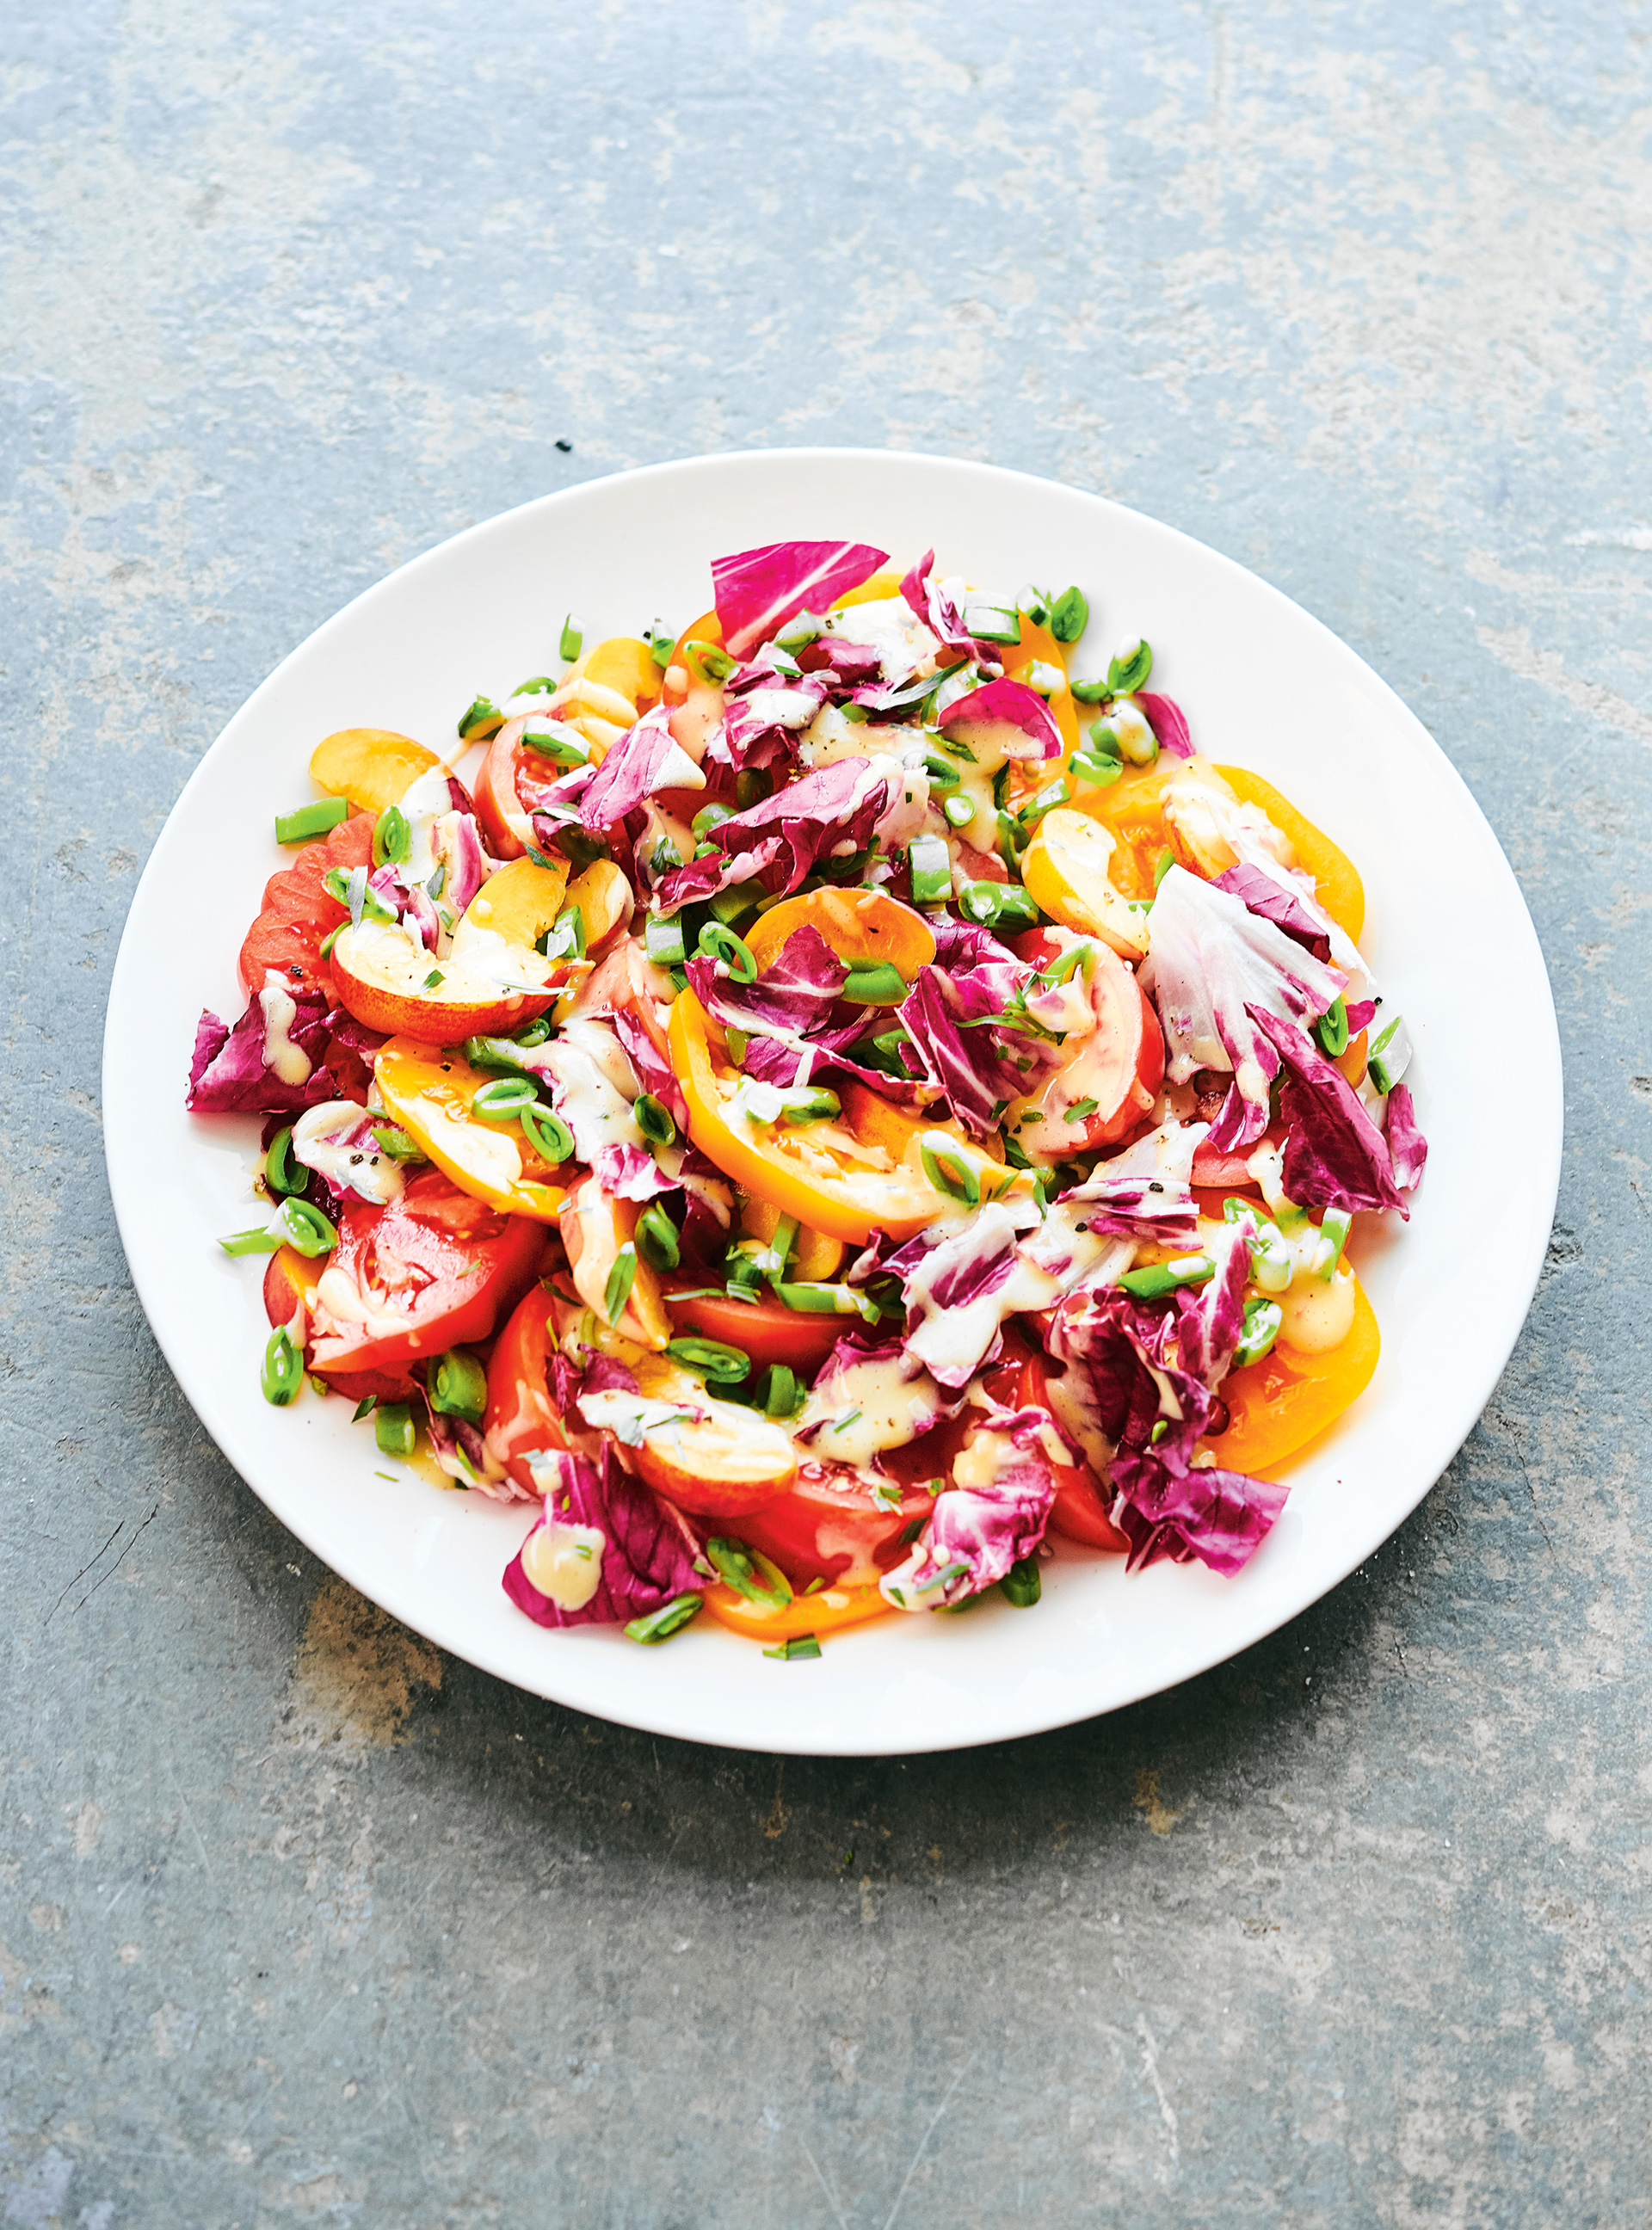 Tomato and Peach Salad with Béarnaise Dressing